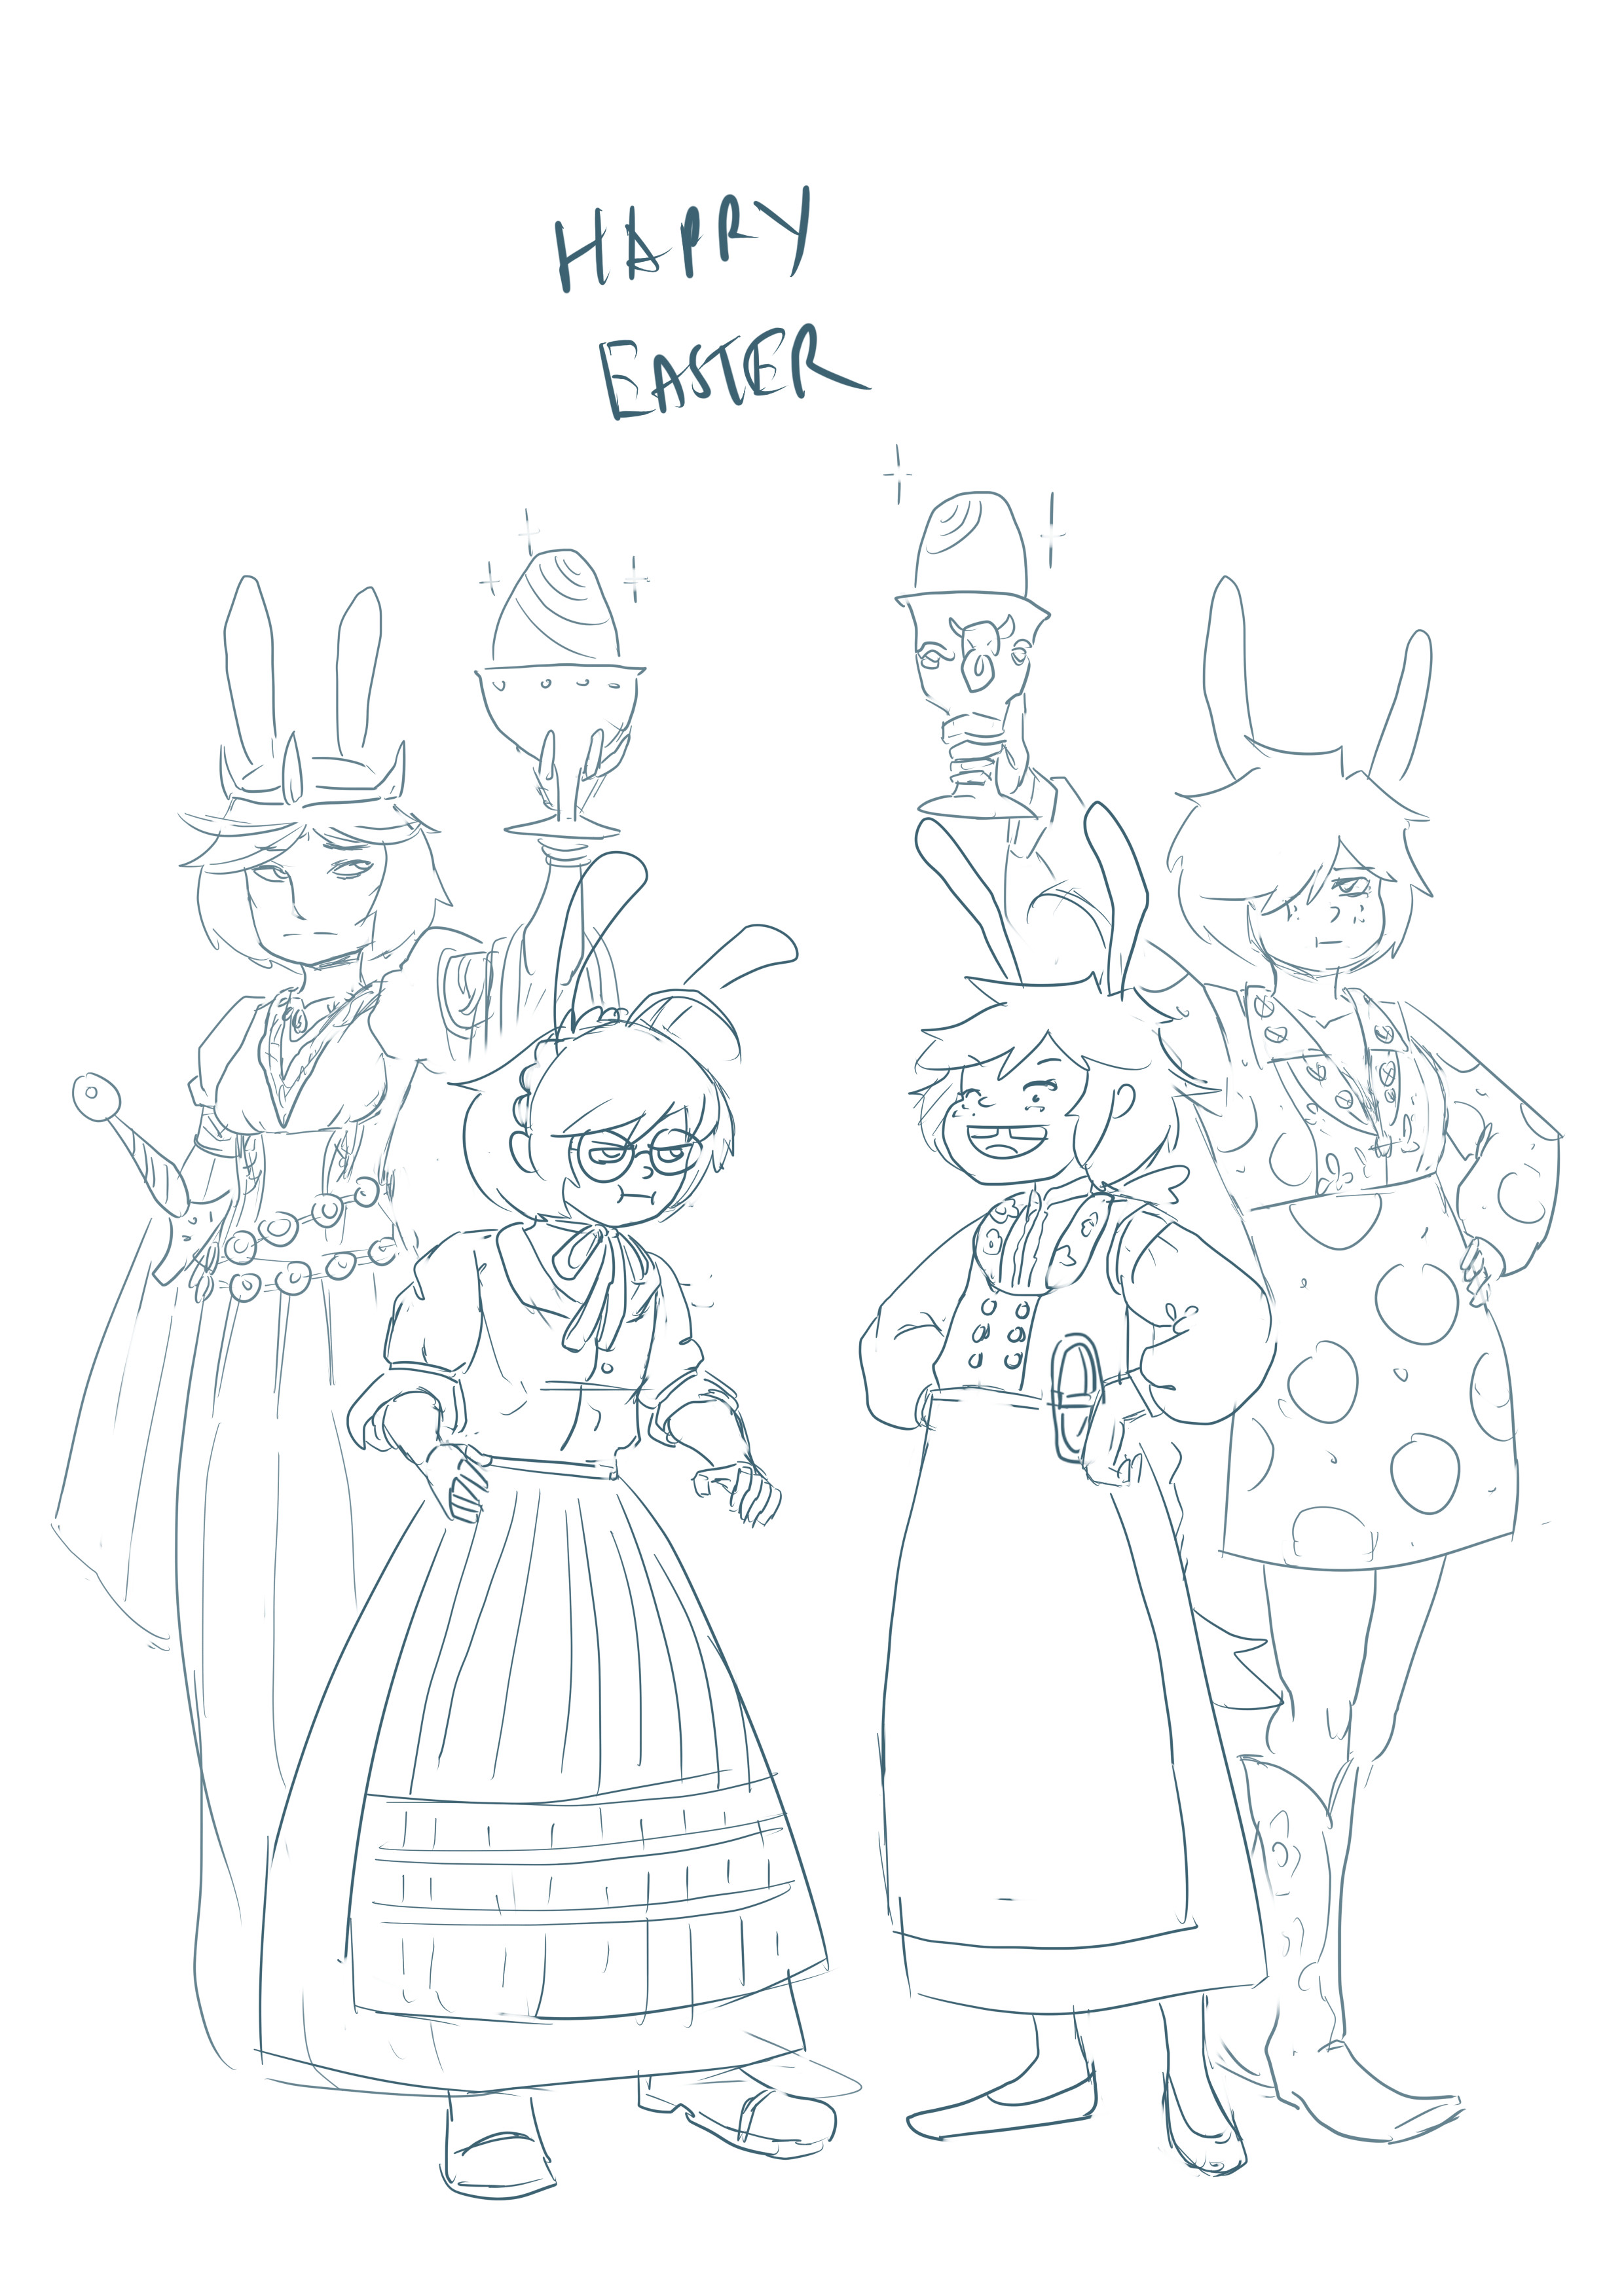 Old Easter pic. Easter is the best time to compare Welsh and Finn dresses.